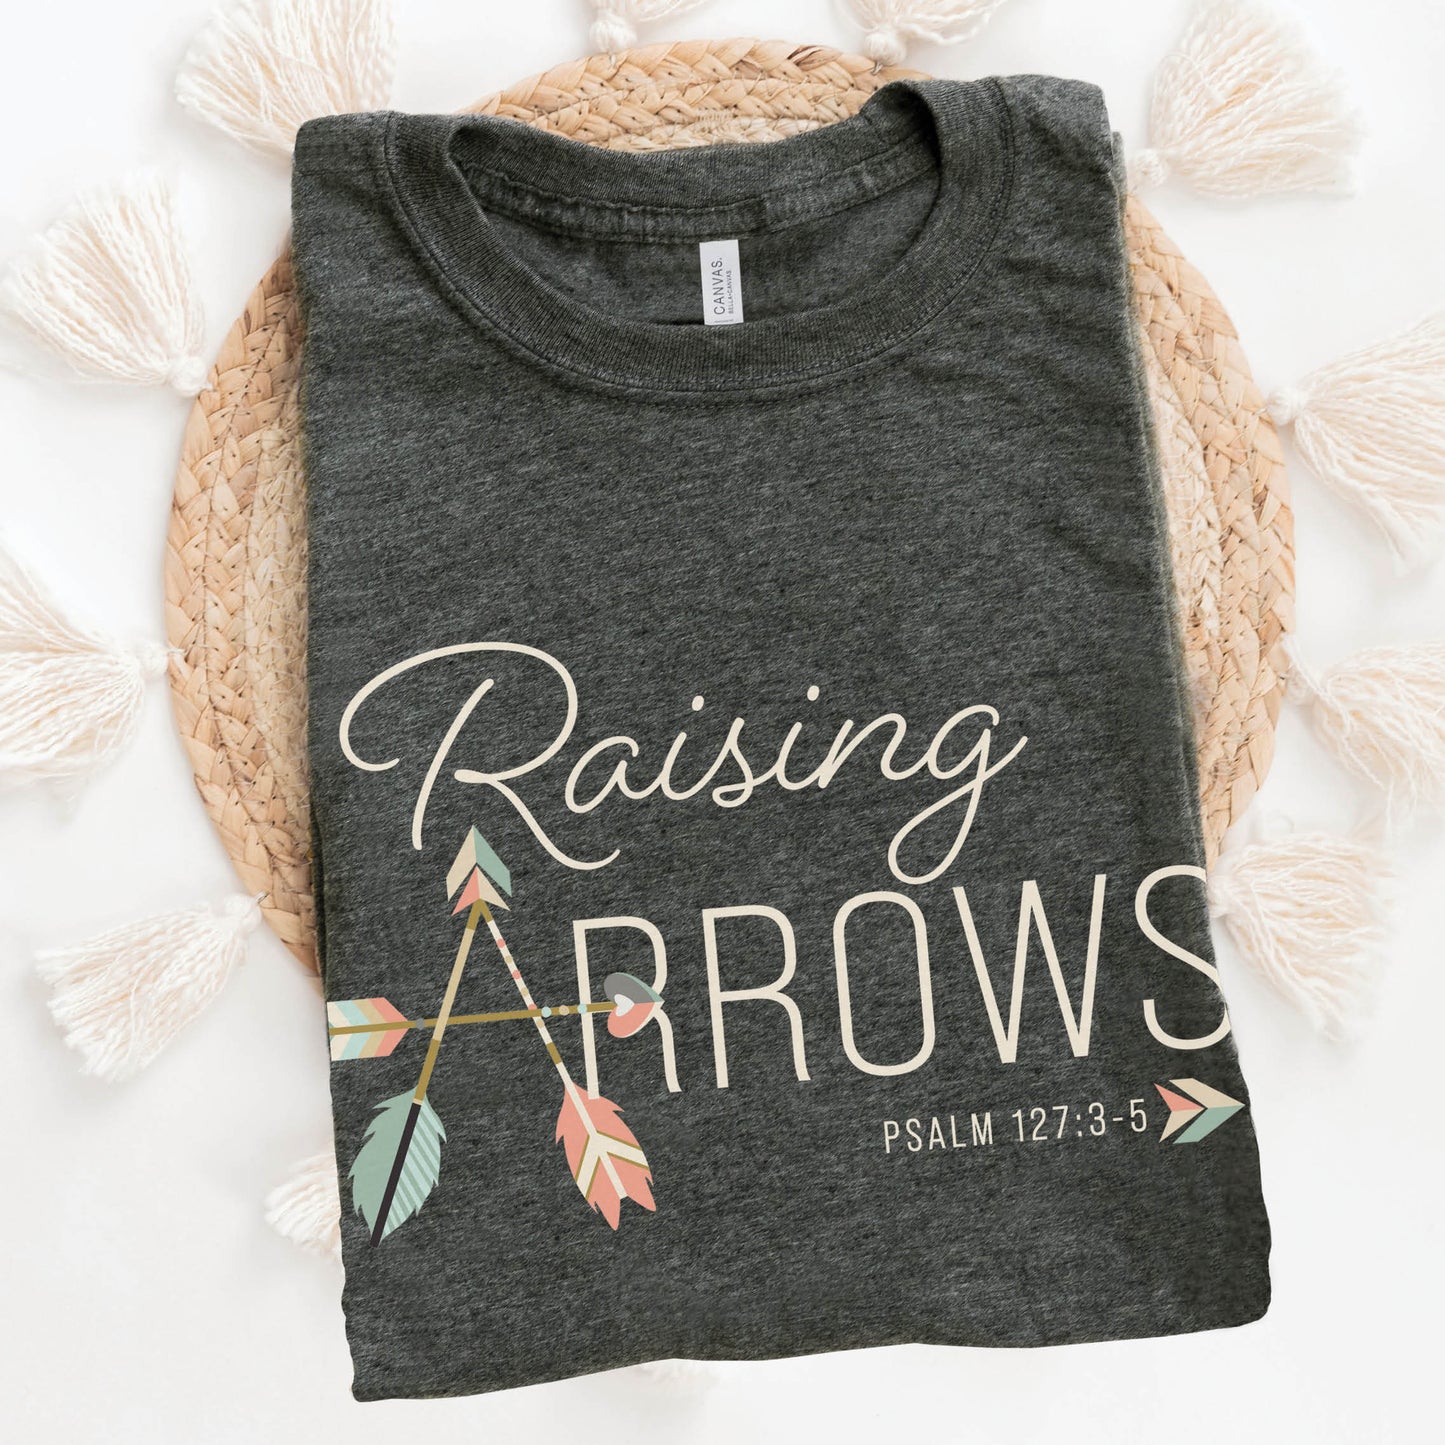 Heather dark gray and pastel boho arrow Christian aesthetic faith-based t-shirt with Psalm 127:3-5 bible verse quote that says "Raising Arrows" blessed is the one with a quiver full of children, perfect for homeschool moms and kids